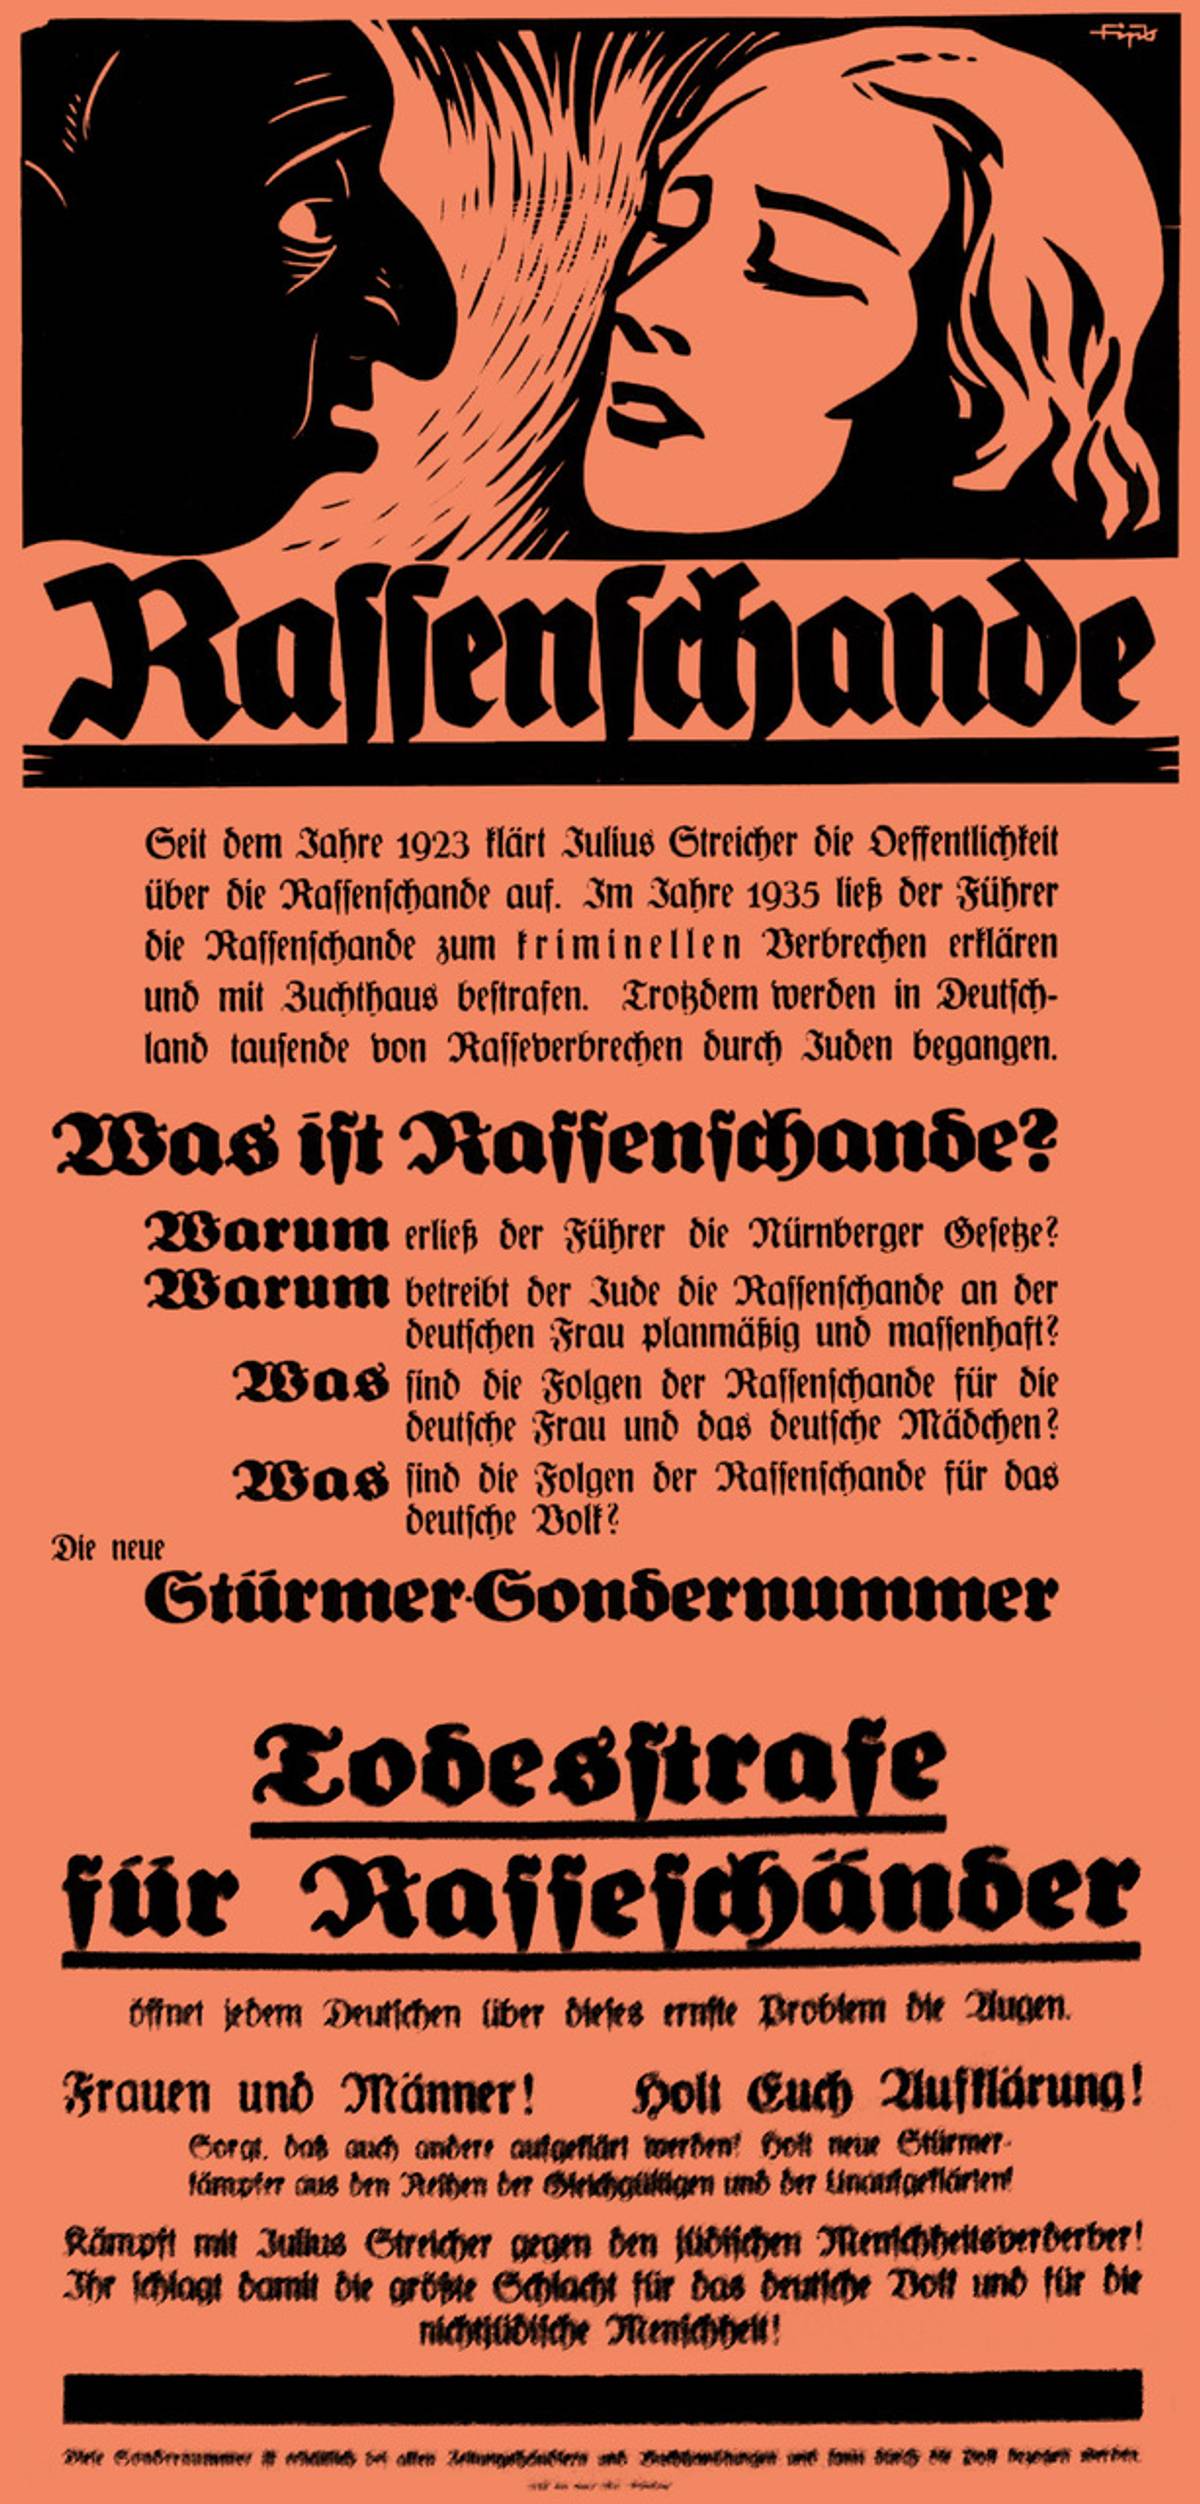 A poster advertising an issue of Julius Streicher’s ‘Der Stürmer’  explicitly shows a stark image of the Negro/Jew, a Black face with  stereotypically Jewish features, while the text itself attacks the Jews for the defilement of Aryan women